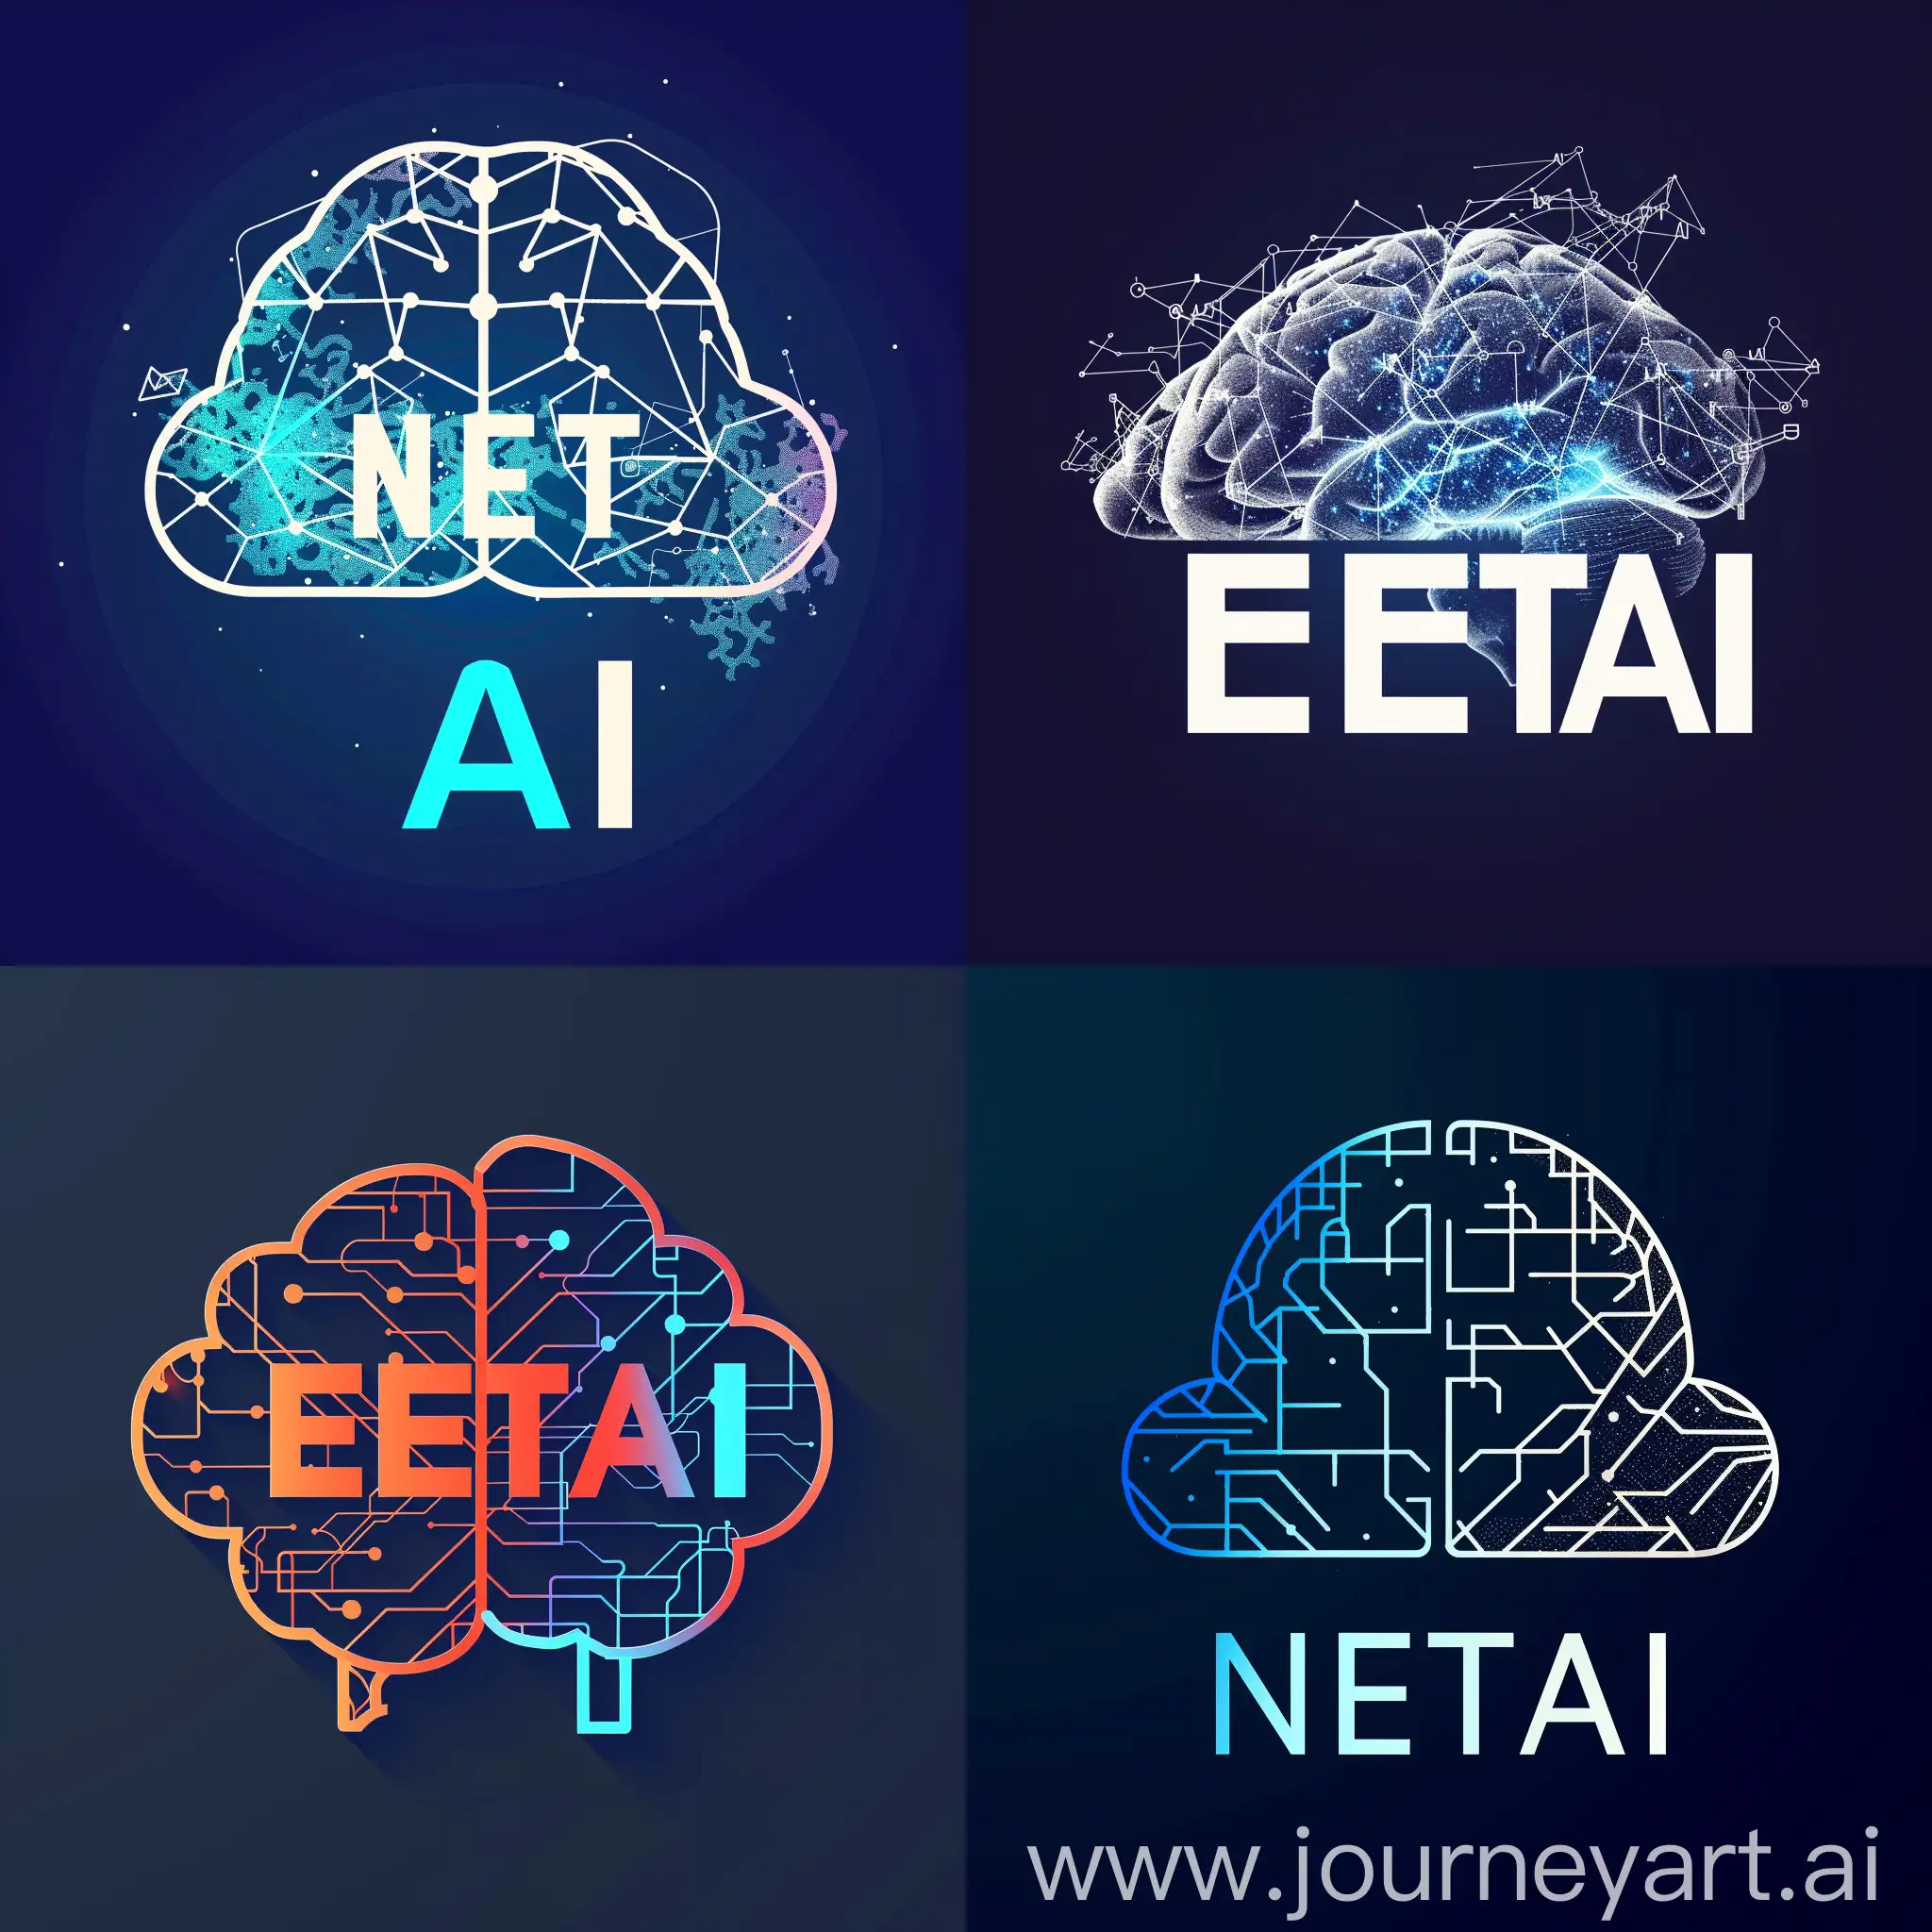 Design of a corporate logo, meaning network-wide AI, with the letters NETAI. The graphic is designed as a cloud (NET) on the outside, and a brain fold (AI) formed by the data flow inside.